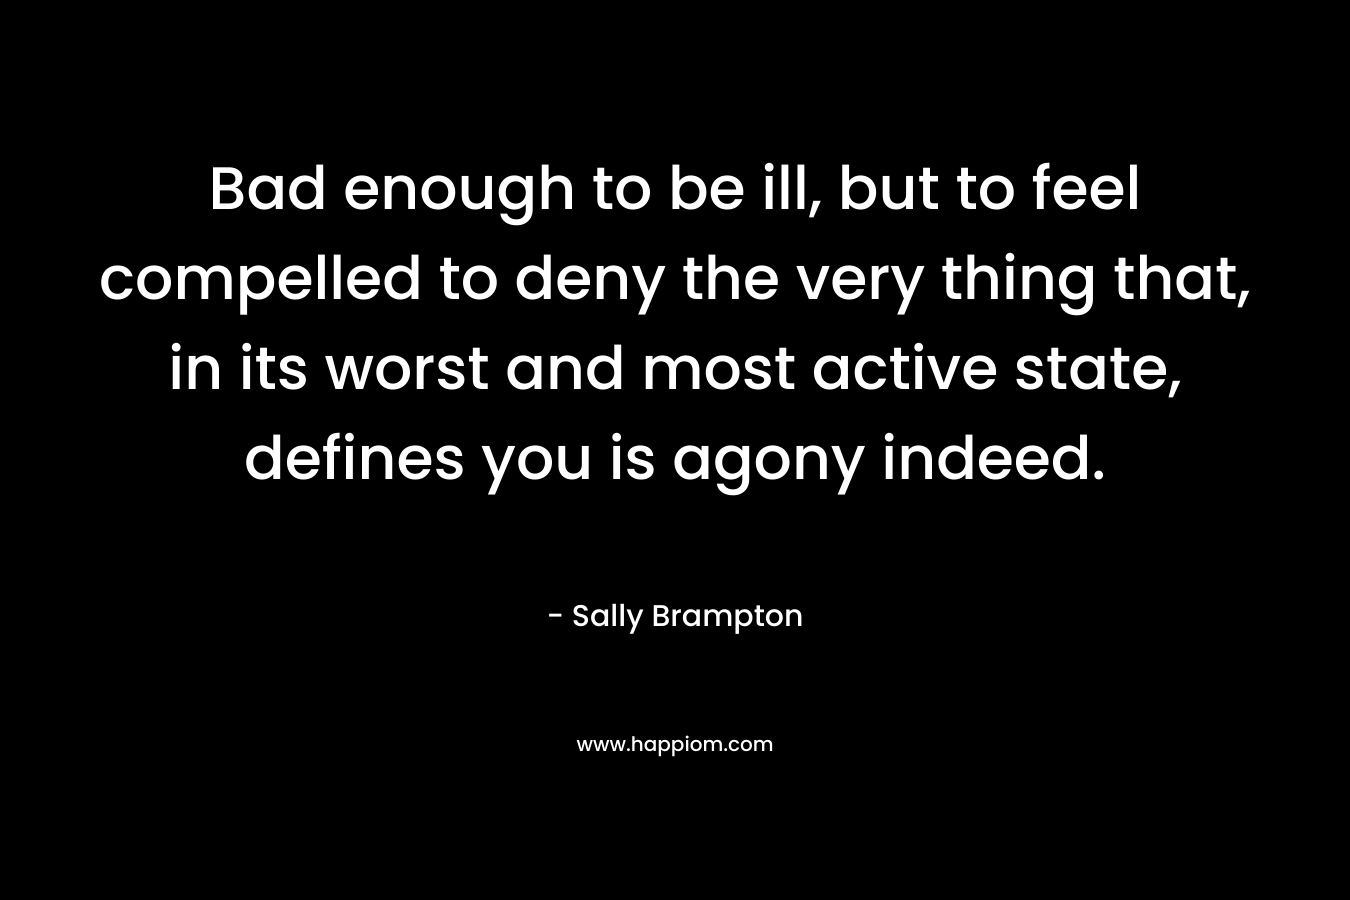 Bad enough to be ill, but to feel compelled to deny the very thing that, in its worst and most active state, defines you is agony indeed. – Sally Brampton